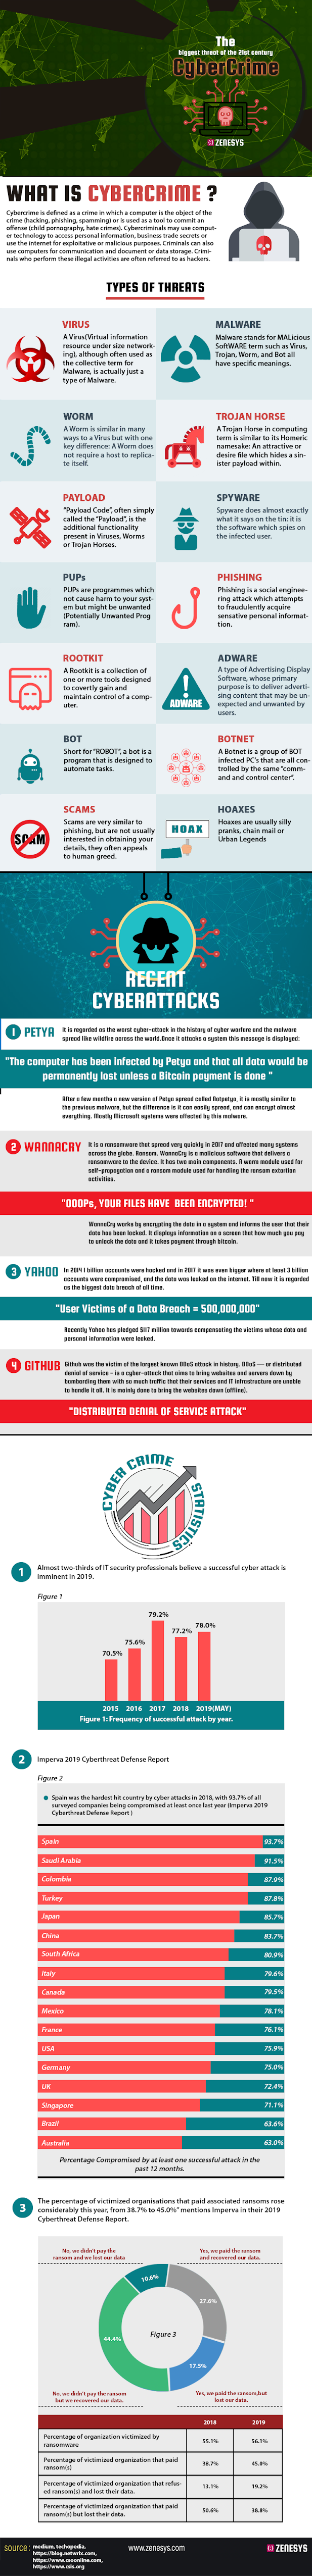  The Biggest Threat of 21st Century -CyberCrime #infographic